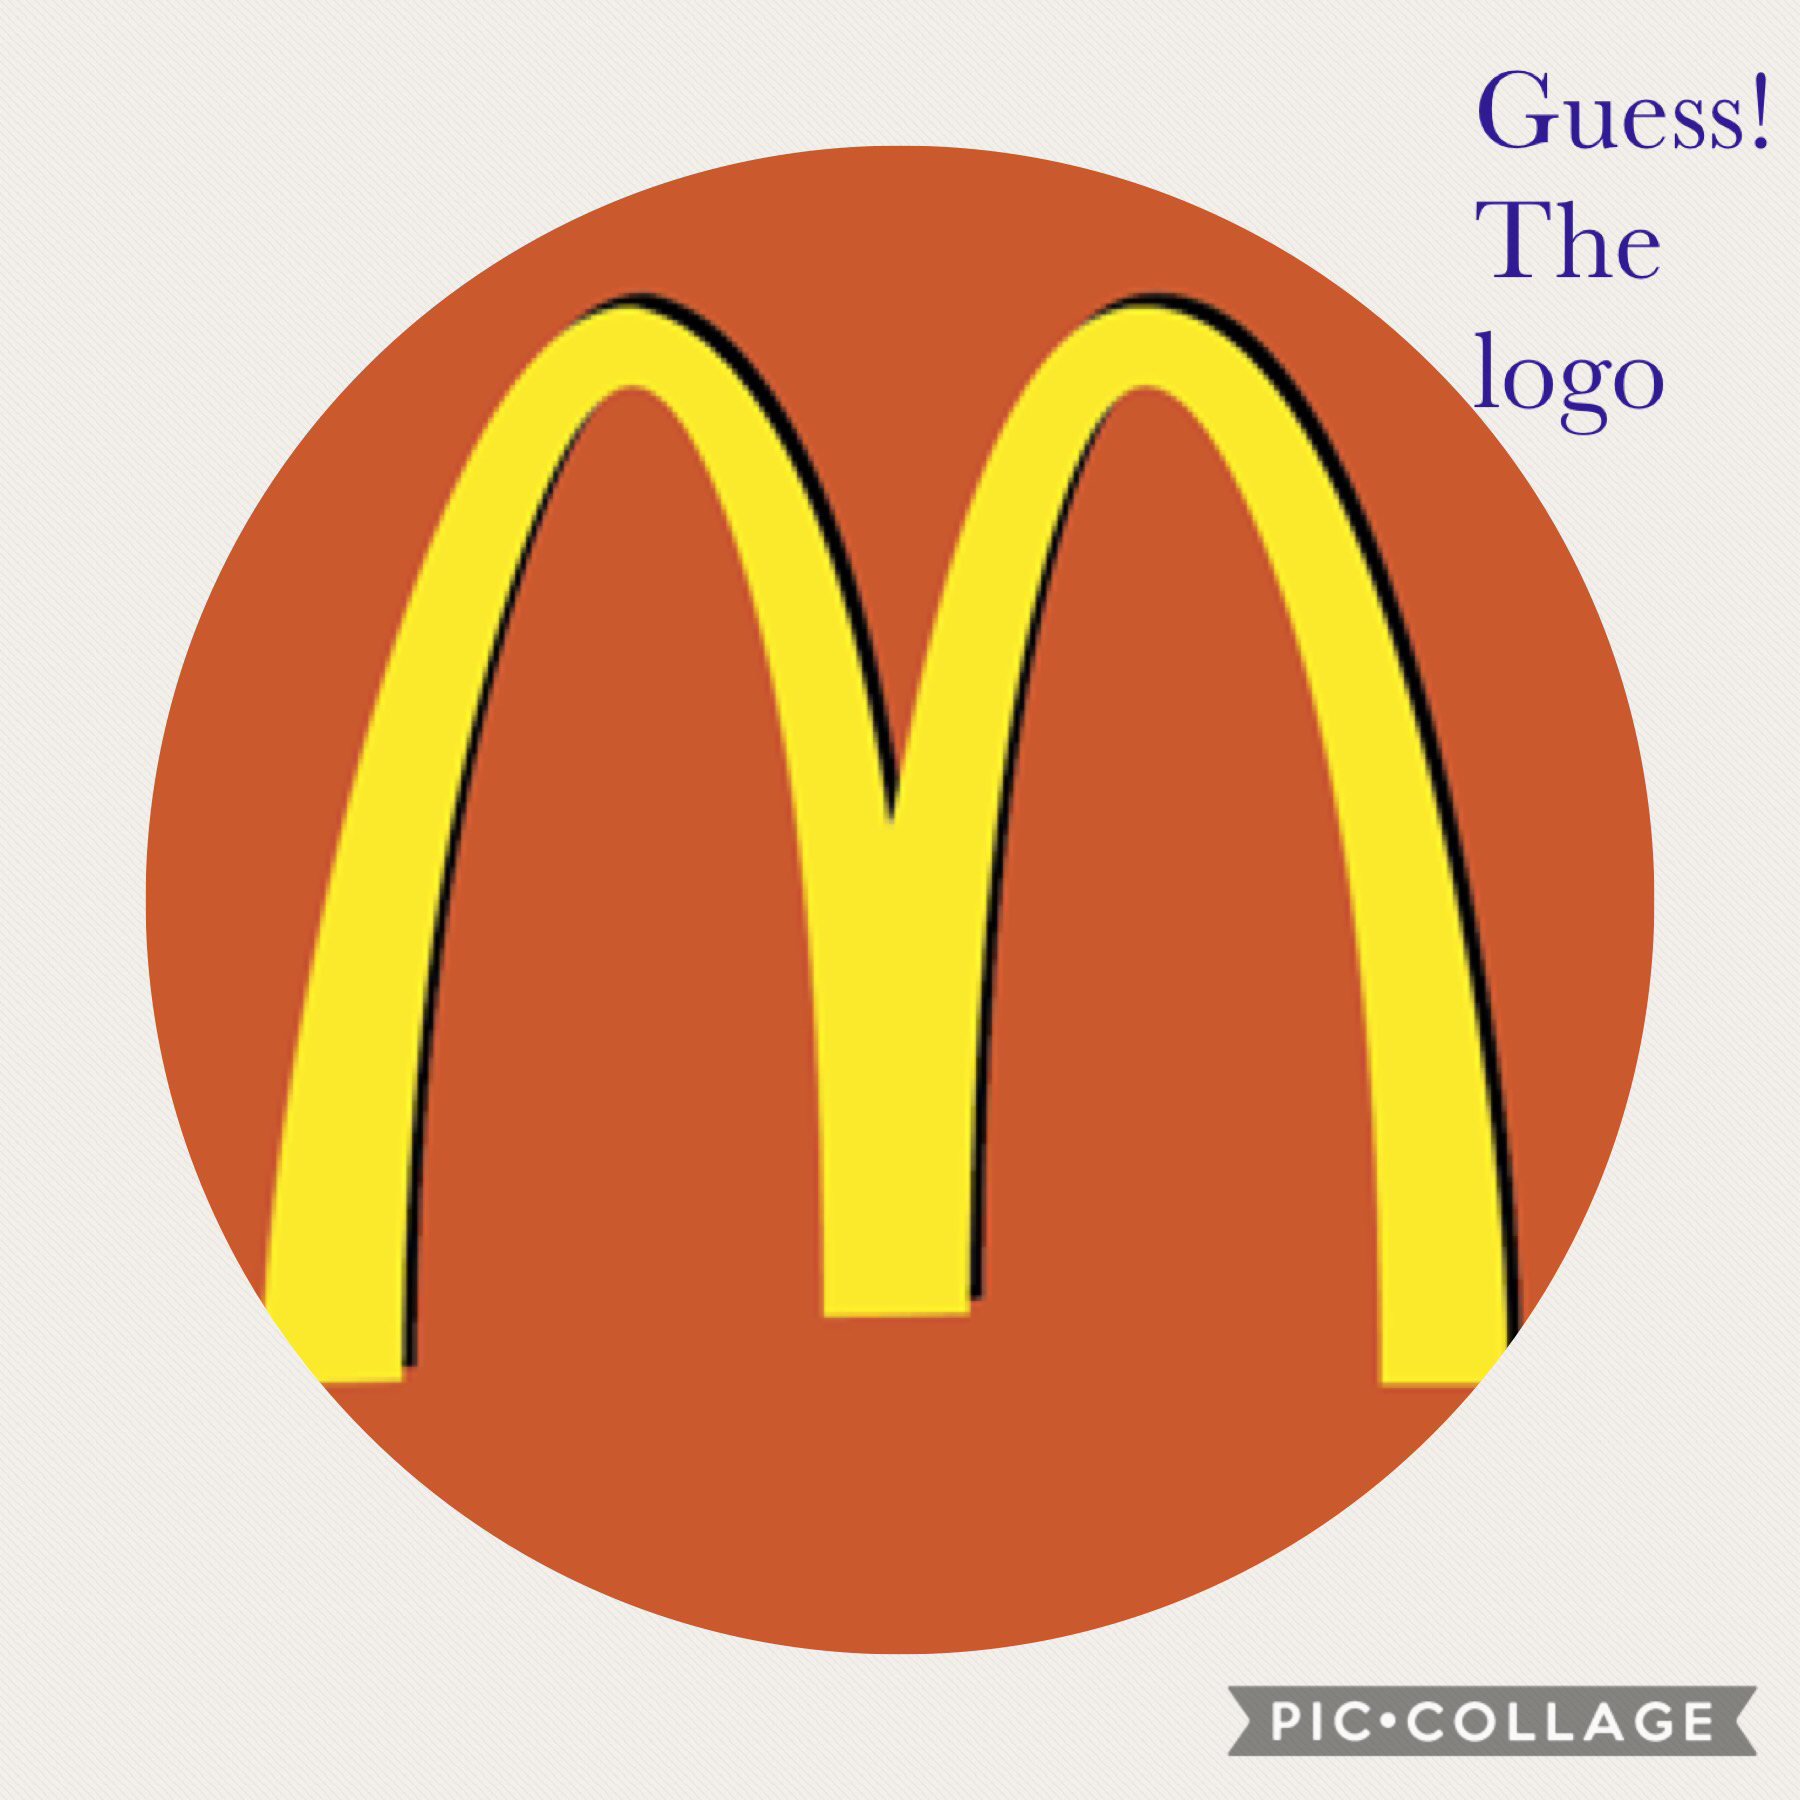 Comment below what you think this logo is